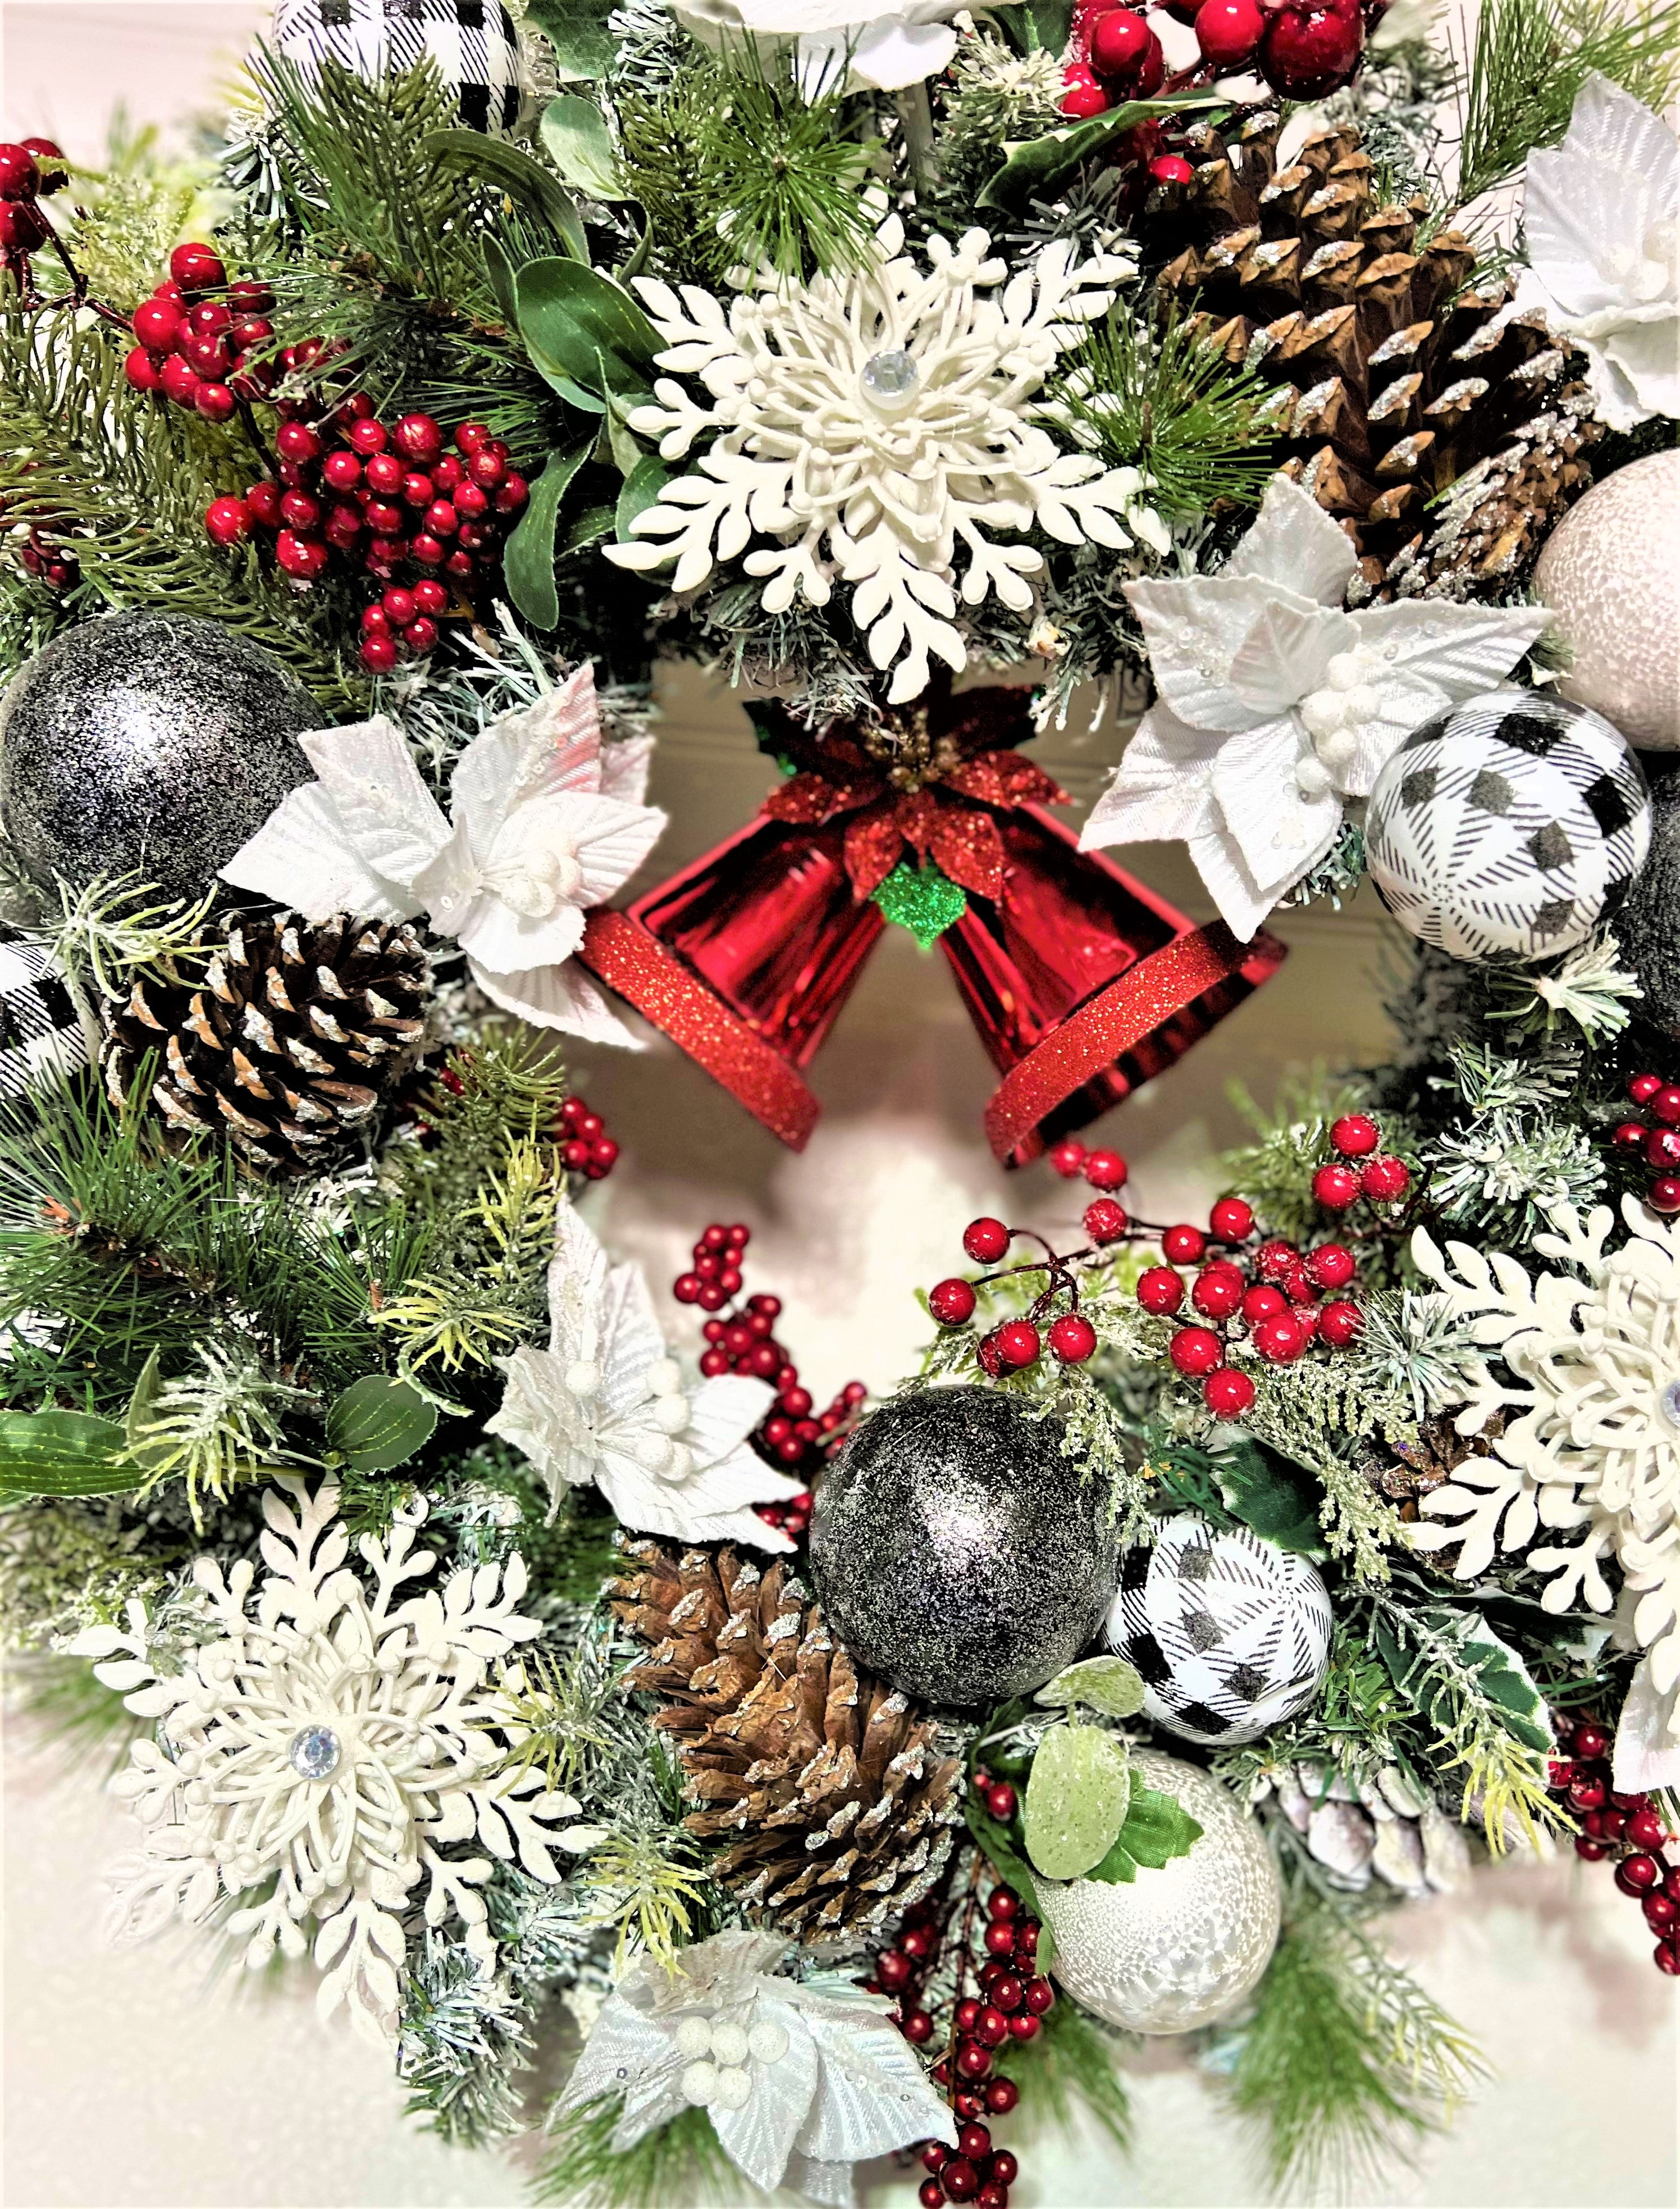 Ring The Bell Christmas Wreath 26"